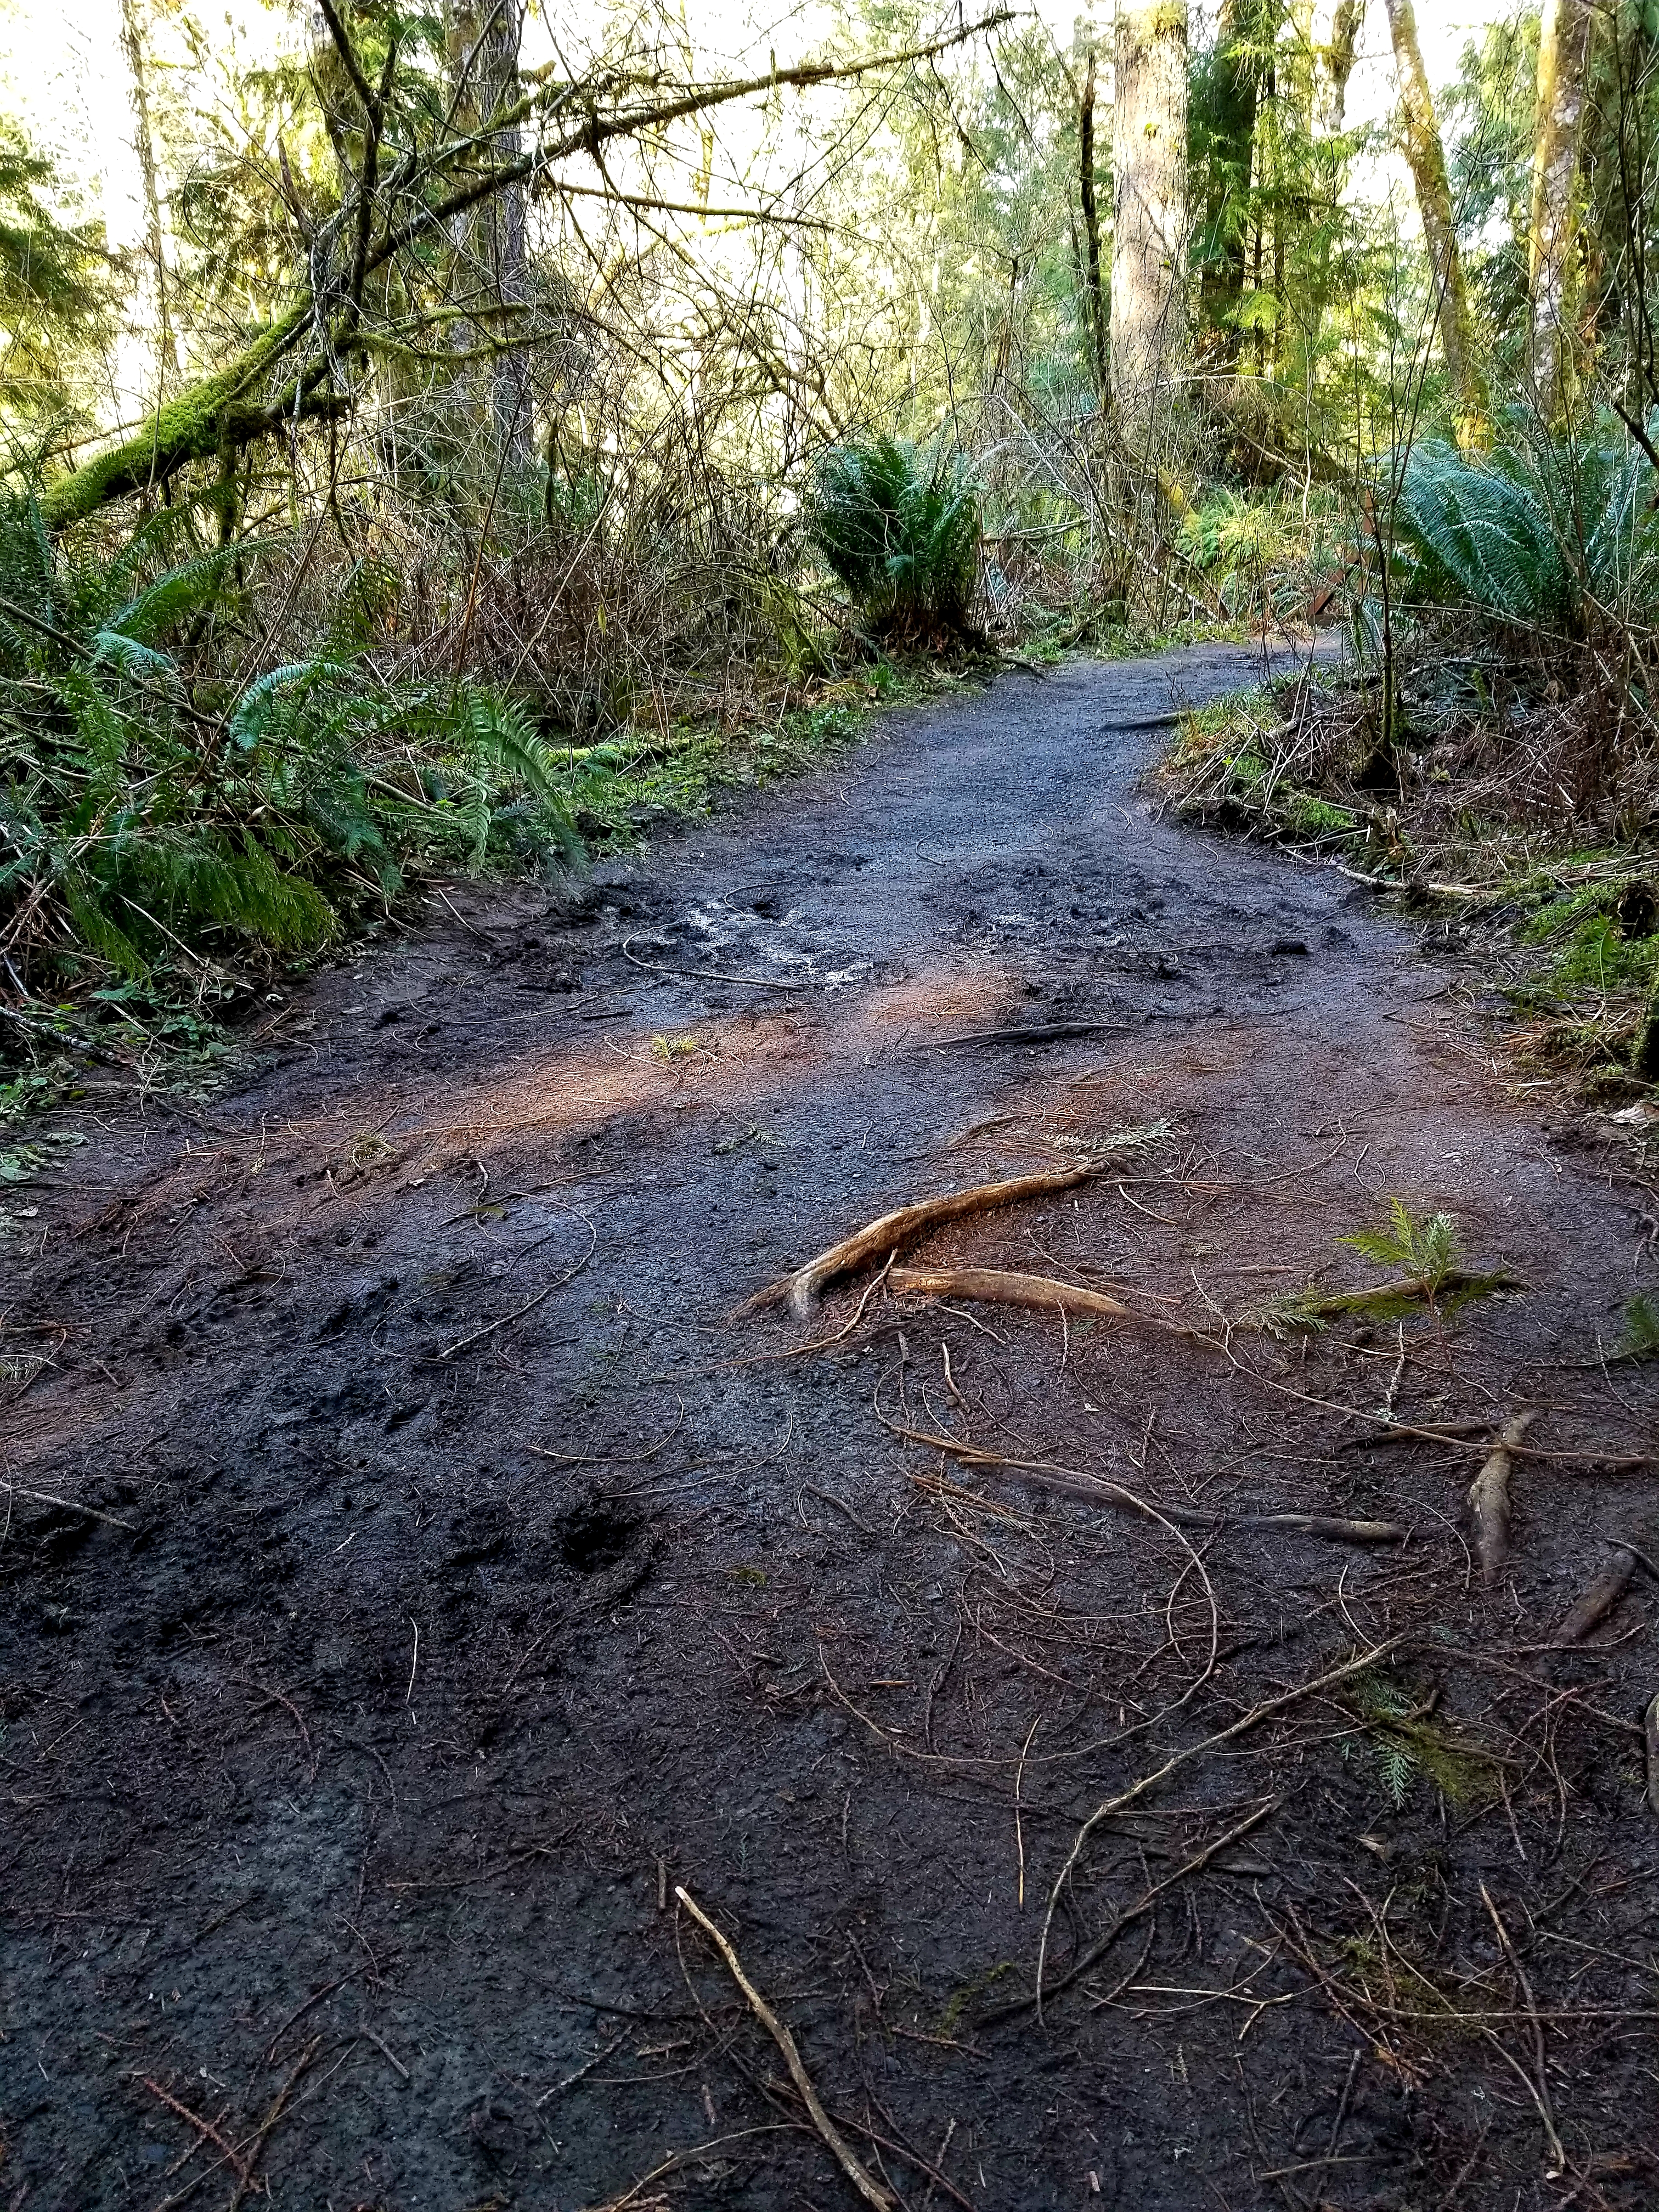 A muddy trail in the forest